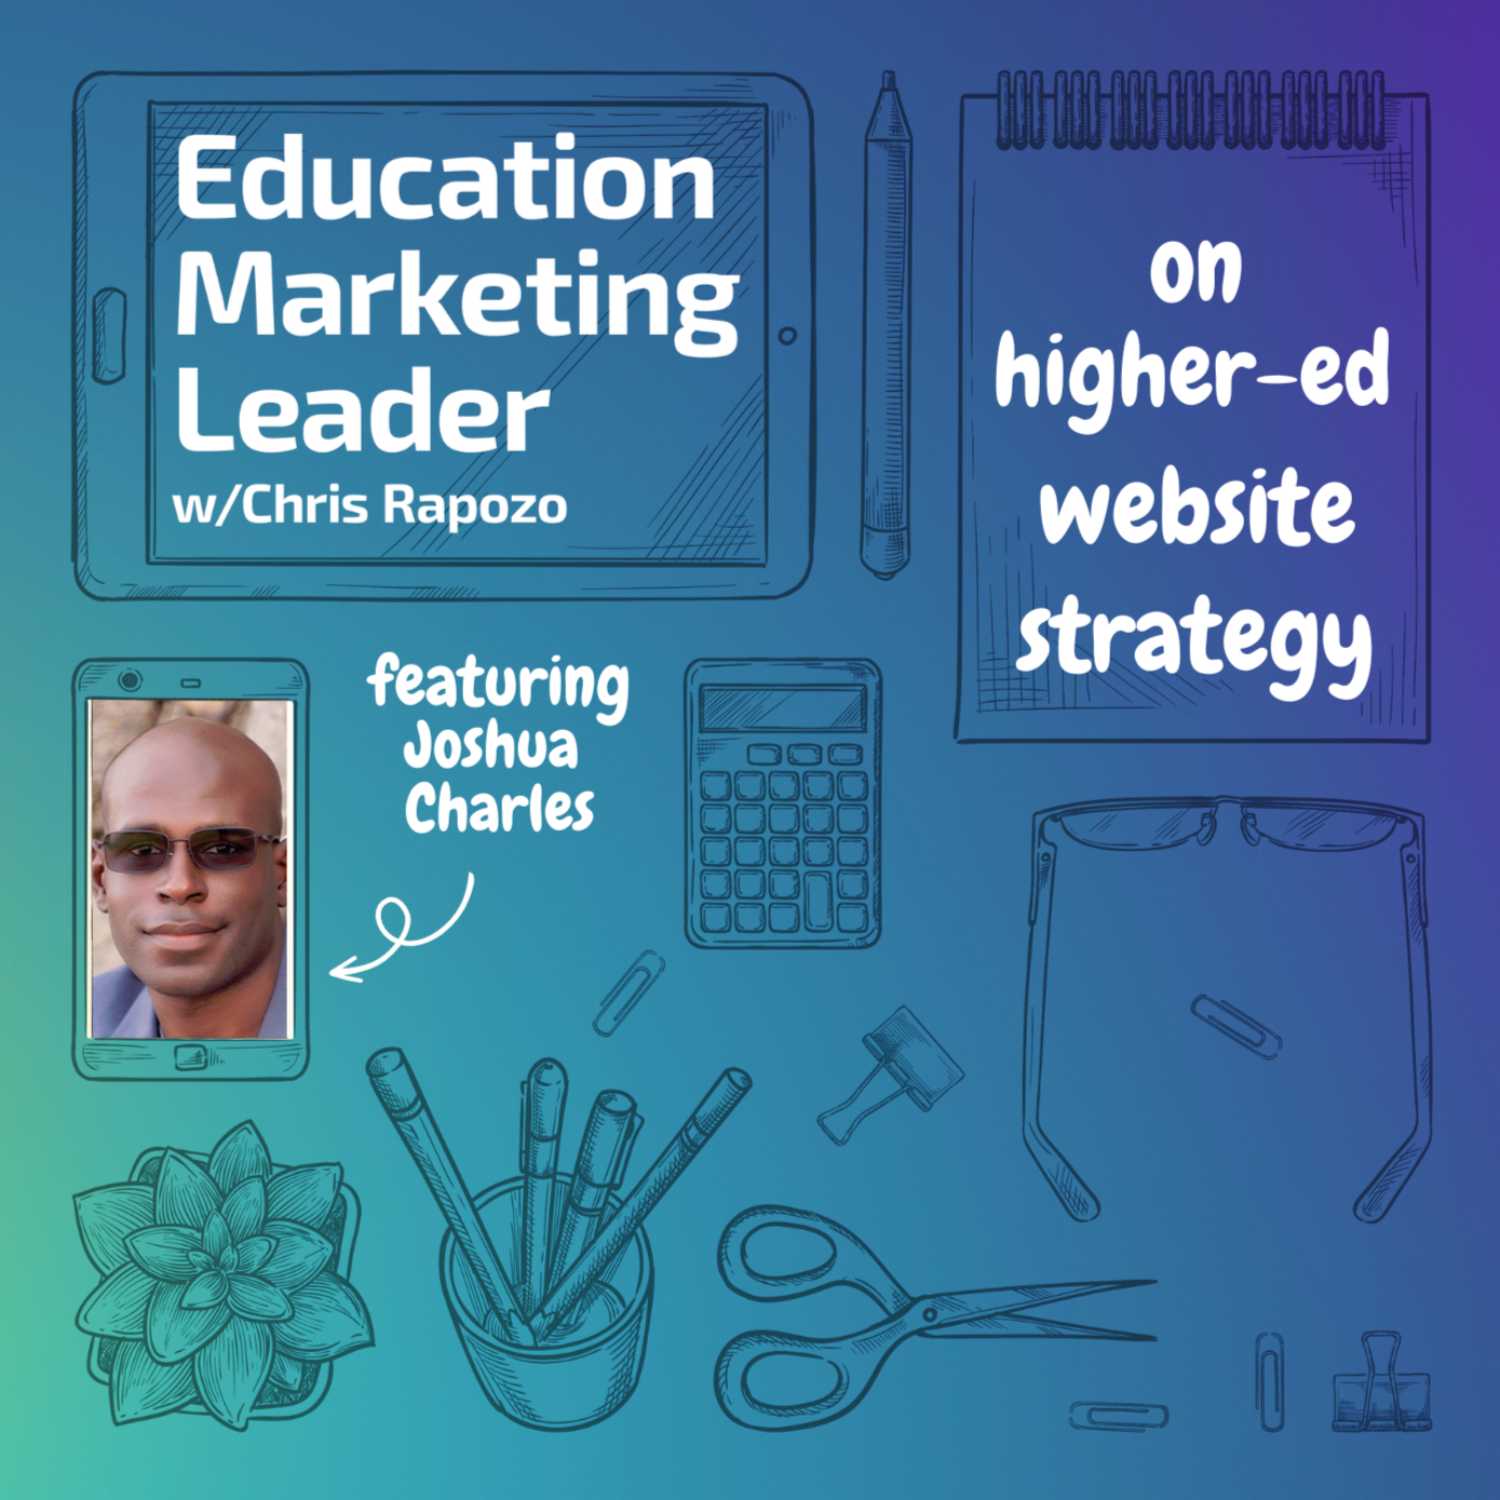 Creating a Well-Rounded Higher-Ed Web Strategy - An Interview with Joshua Charles